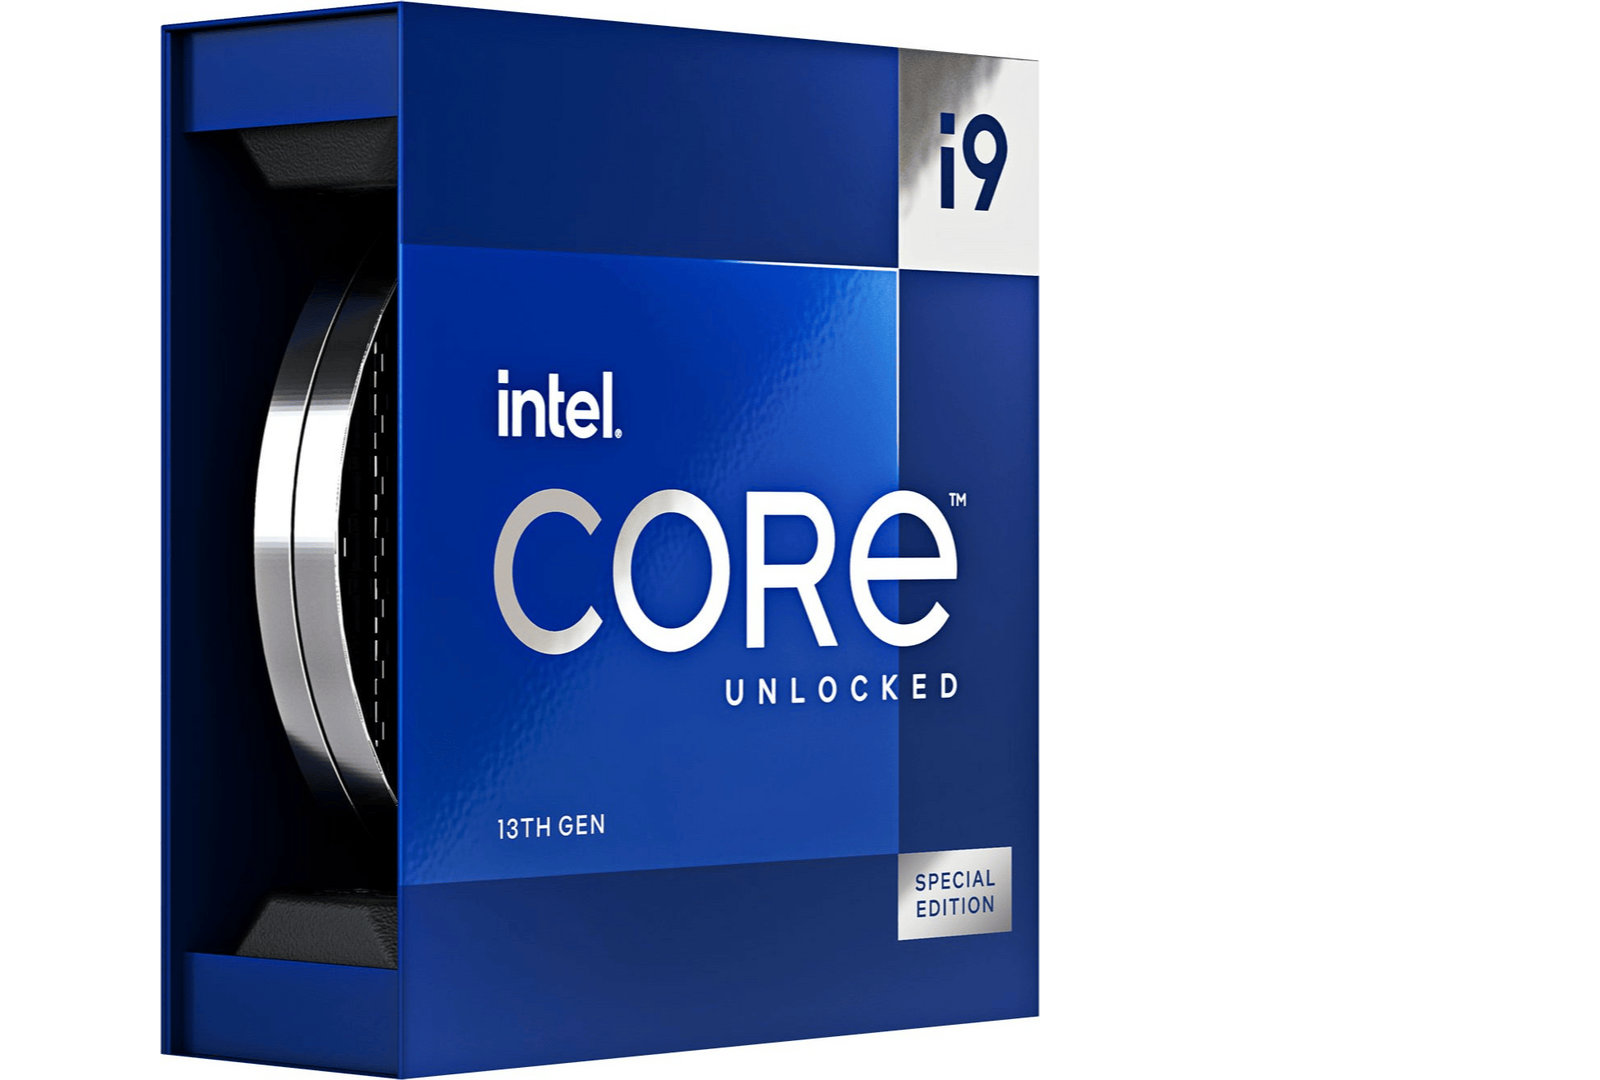 First 6 GHz processor from Intel - Core i9-13900KS 